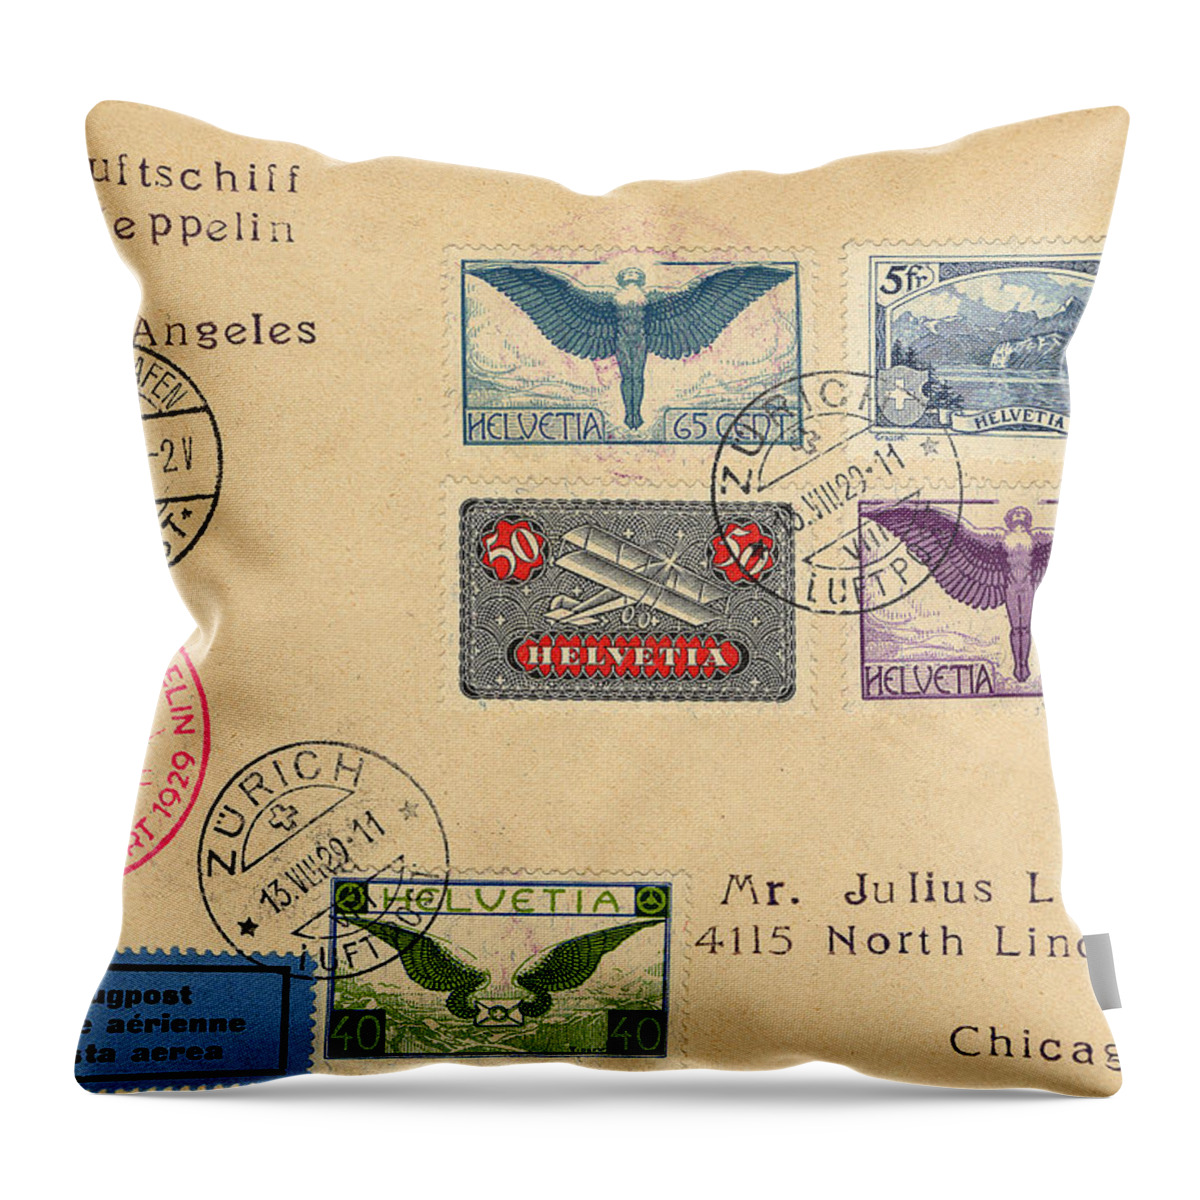 Zeppelin Throw Pillow featuring the photograph Zeppelin Letter 6 by Andrew Fare